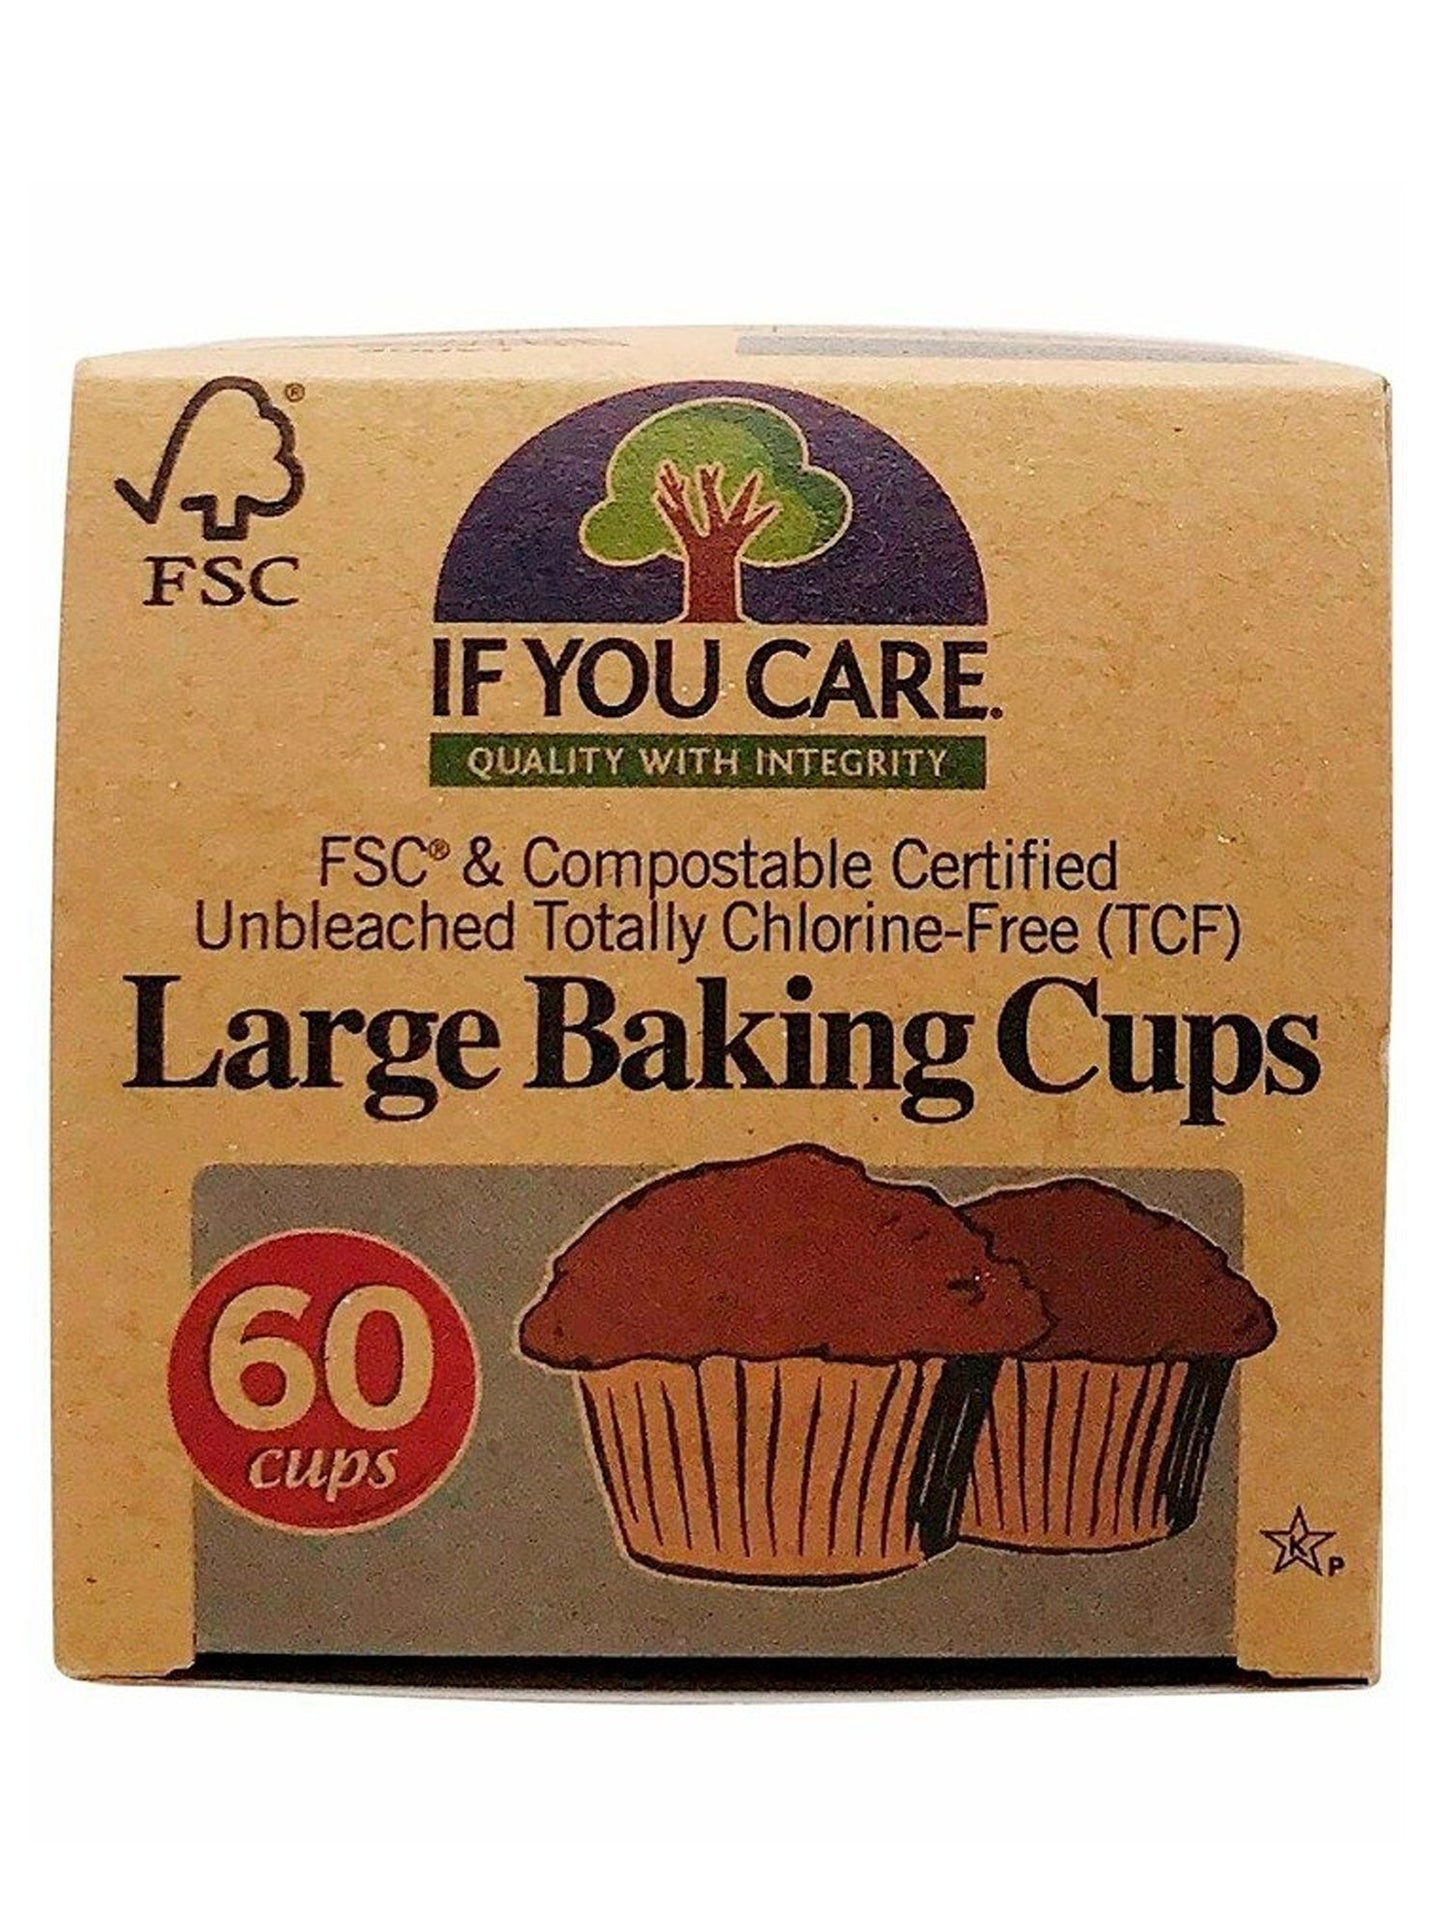 If You Care Baking Cups Large 60 Cups